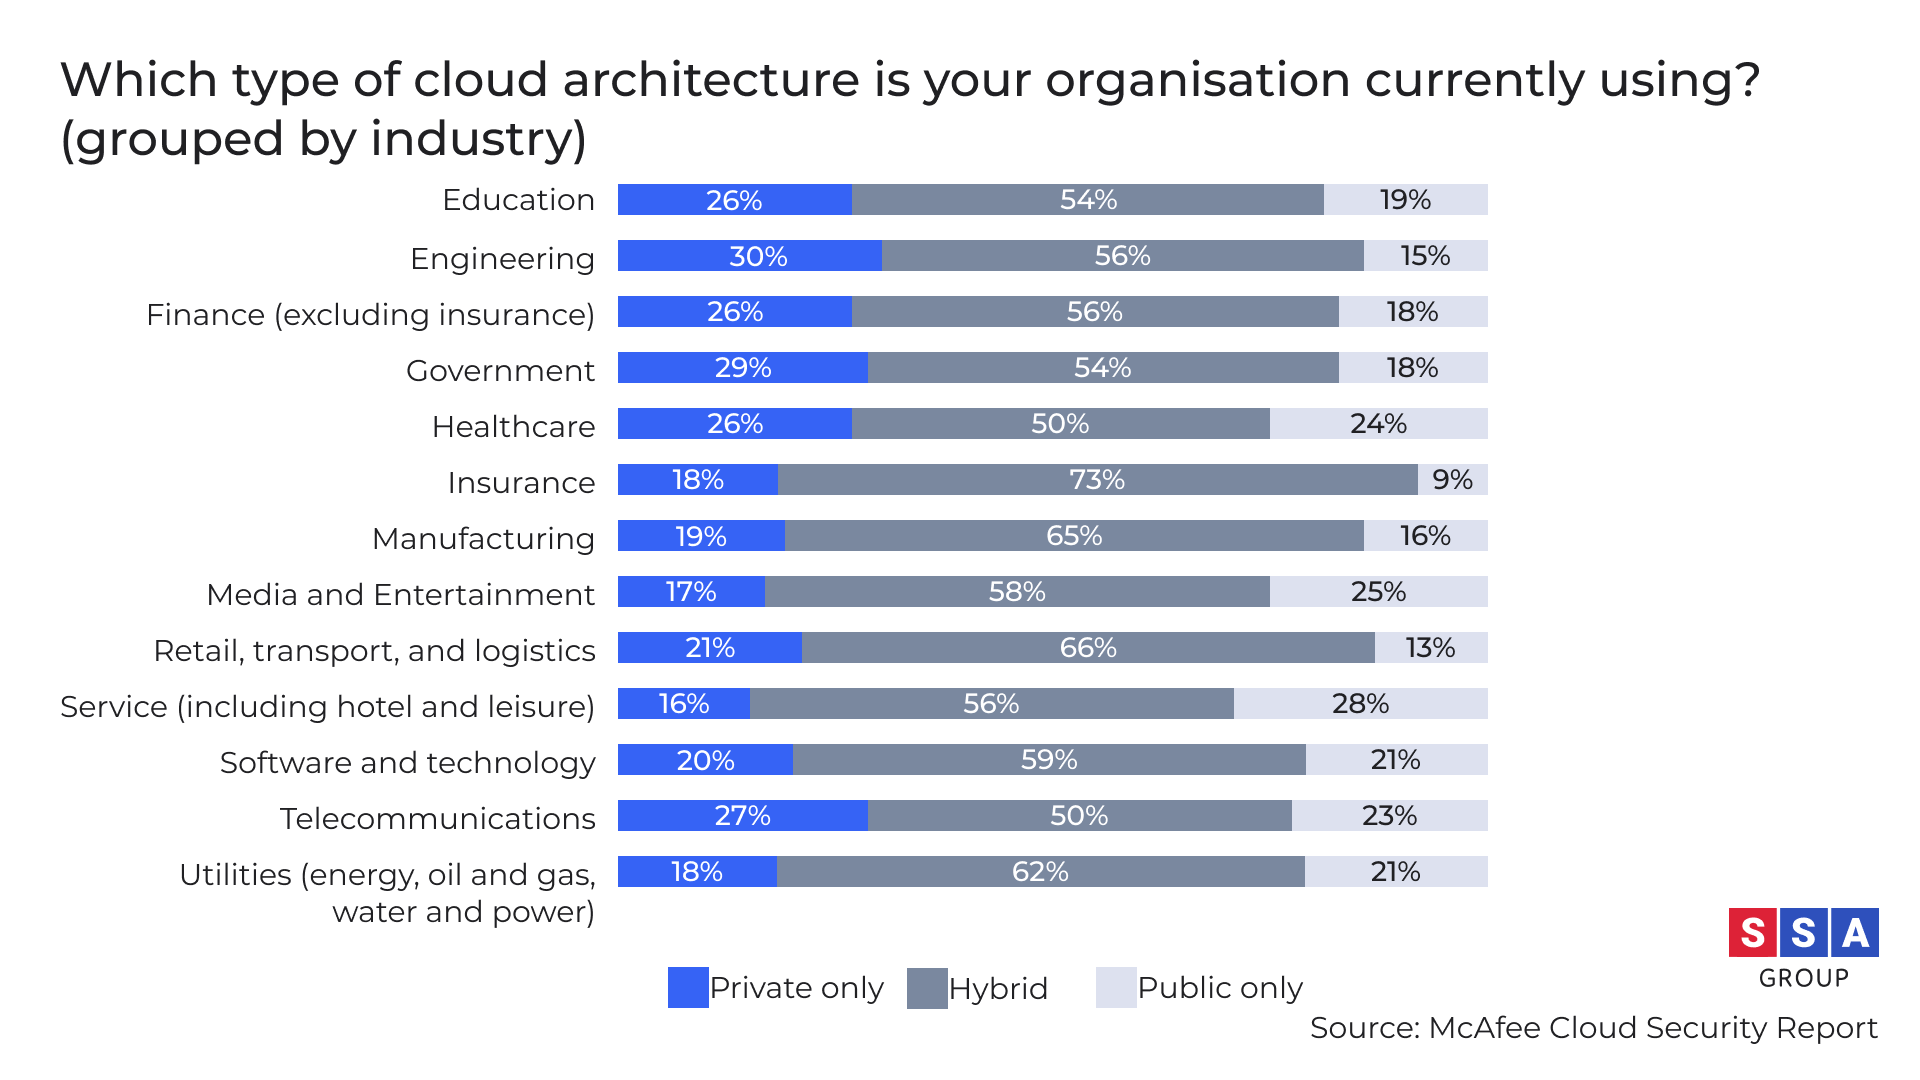 Cloud architecture popularity